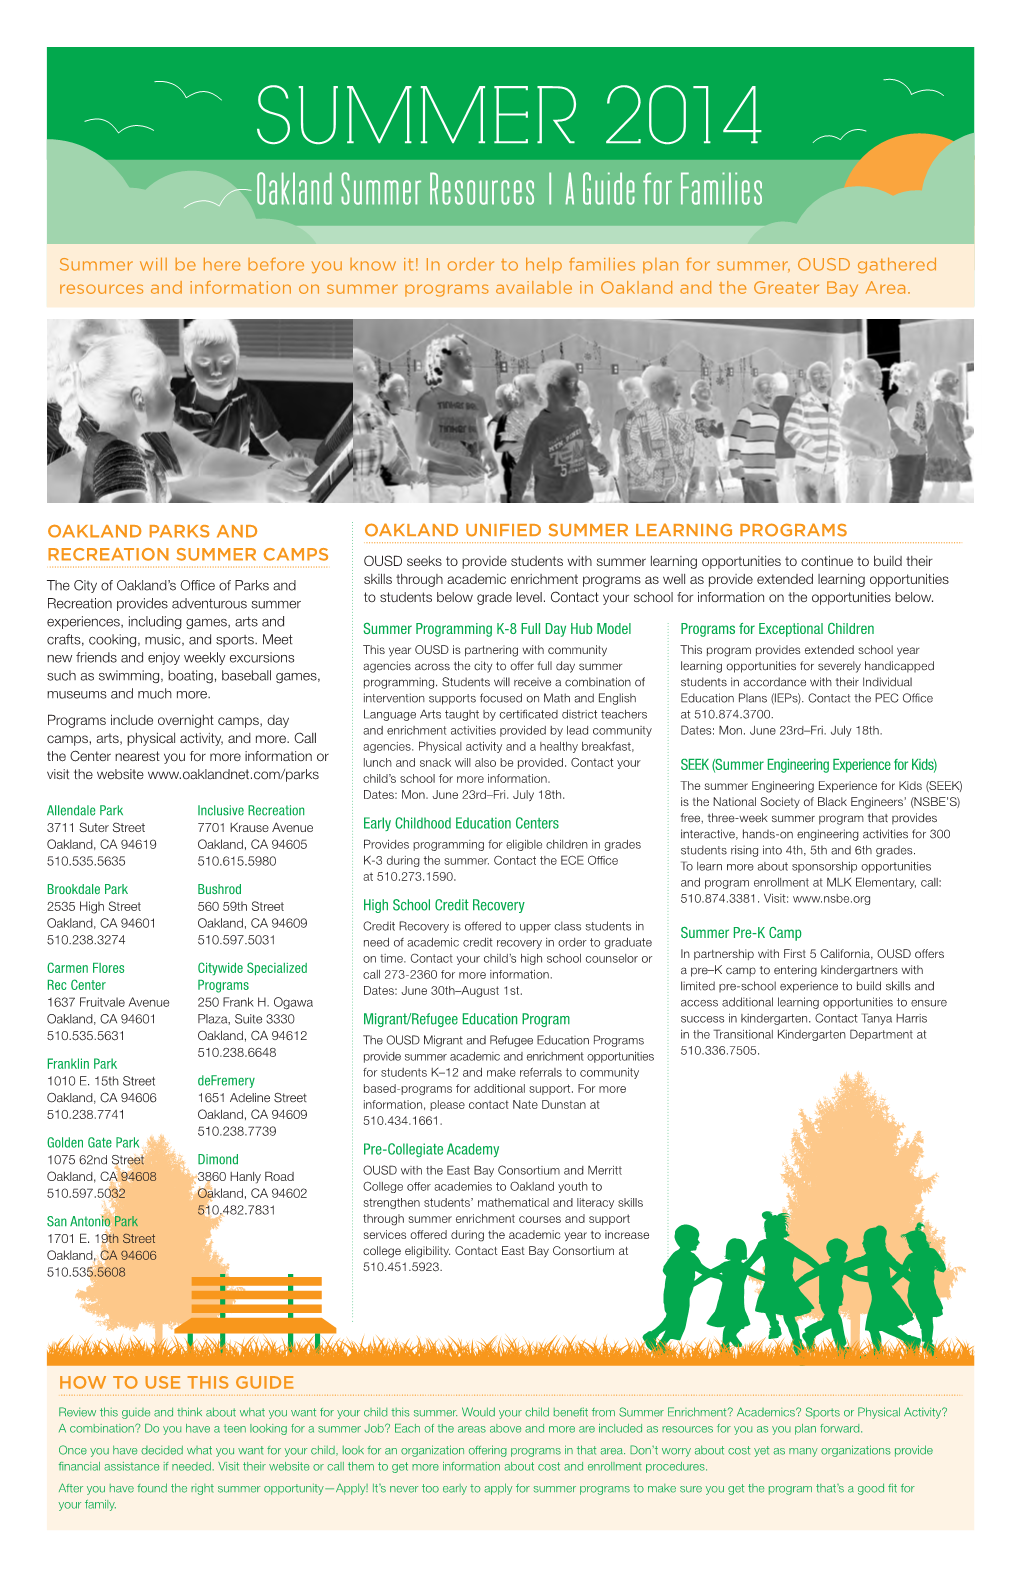 SUMMER 2014 Oakland Summer Resources | a Guide for Families